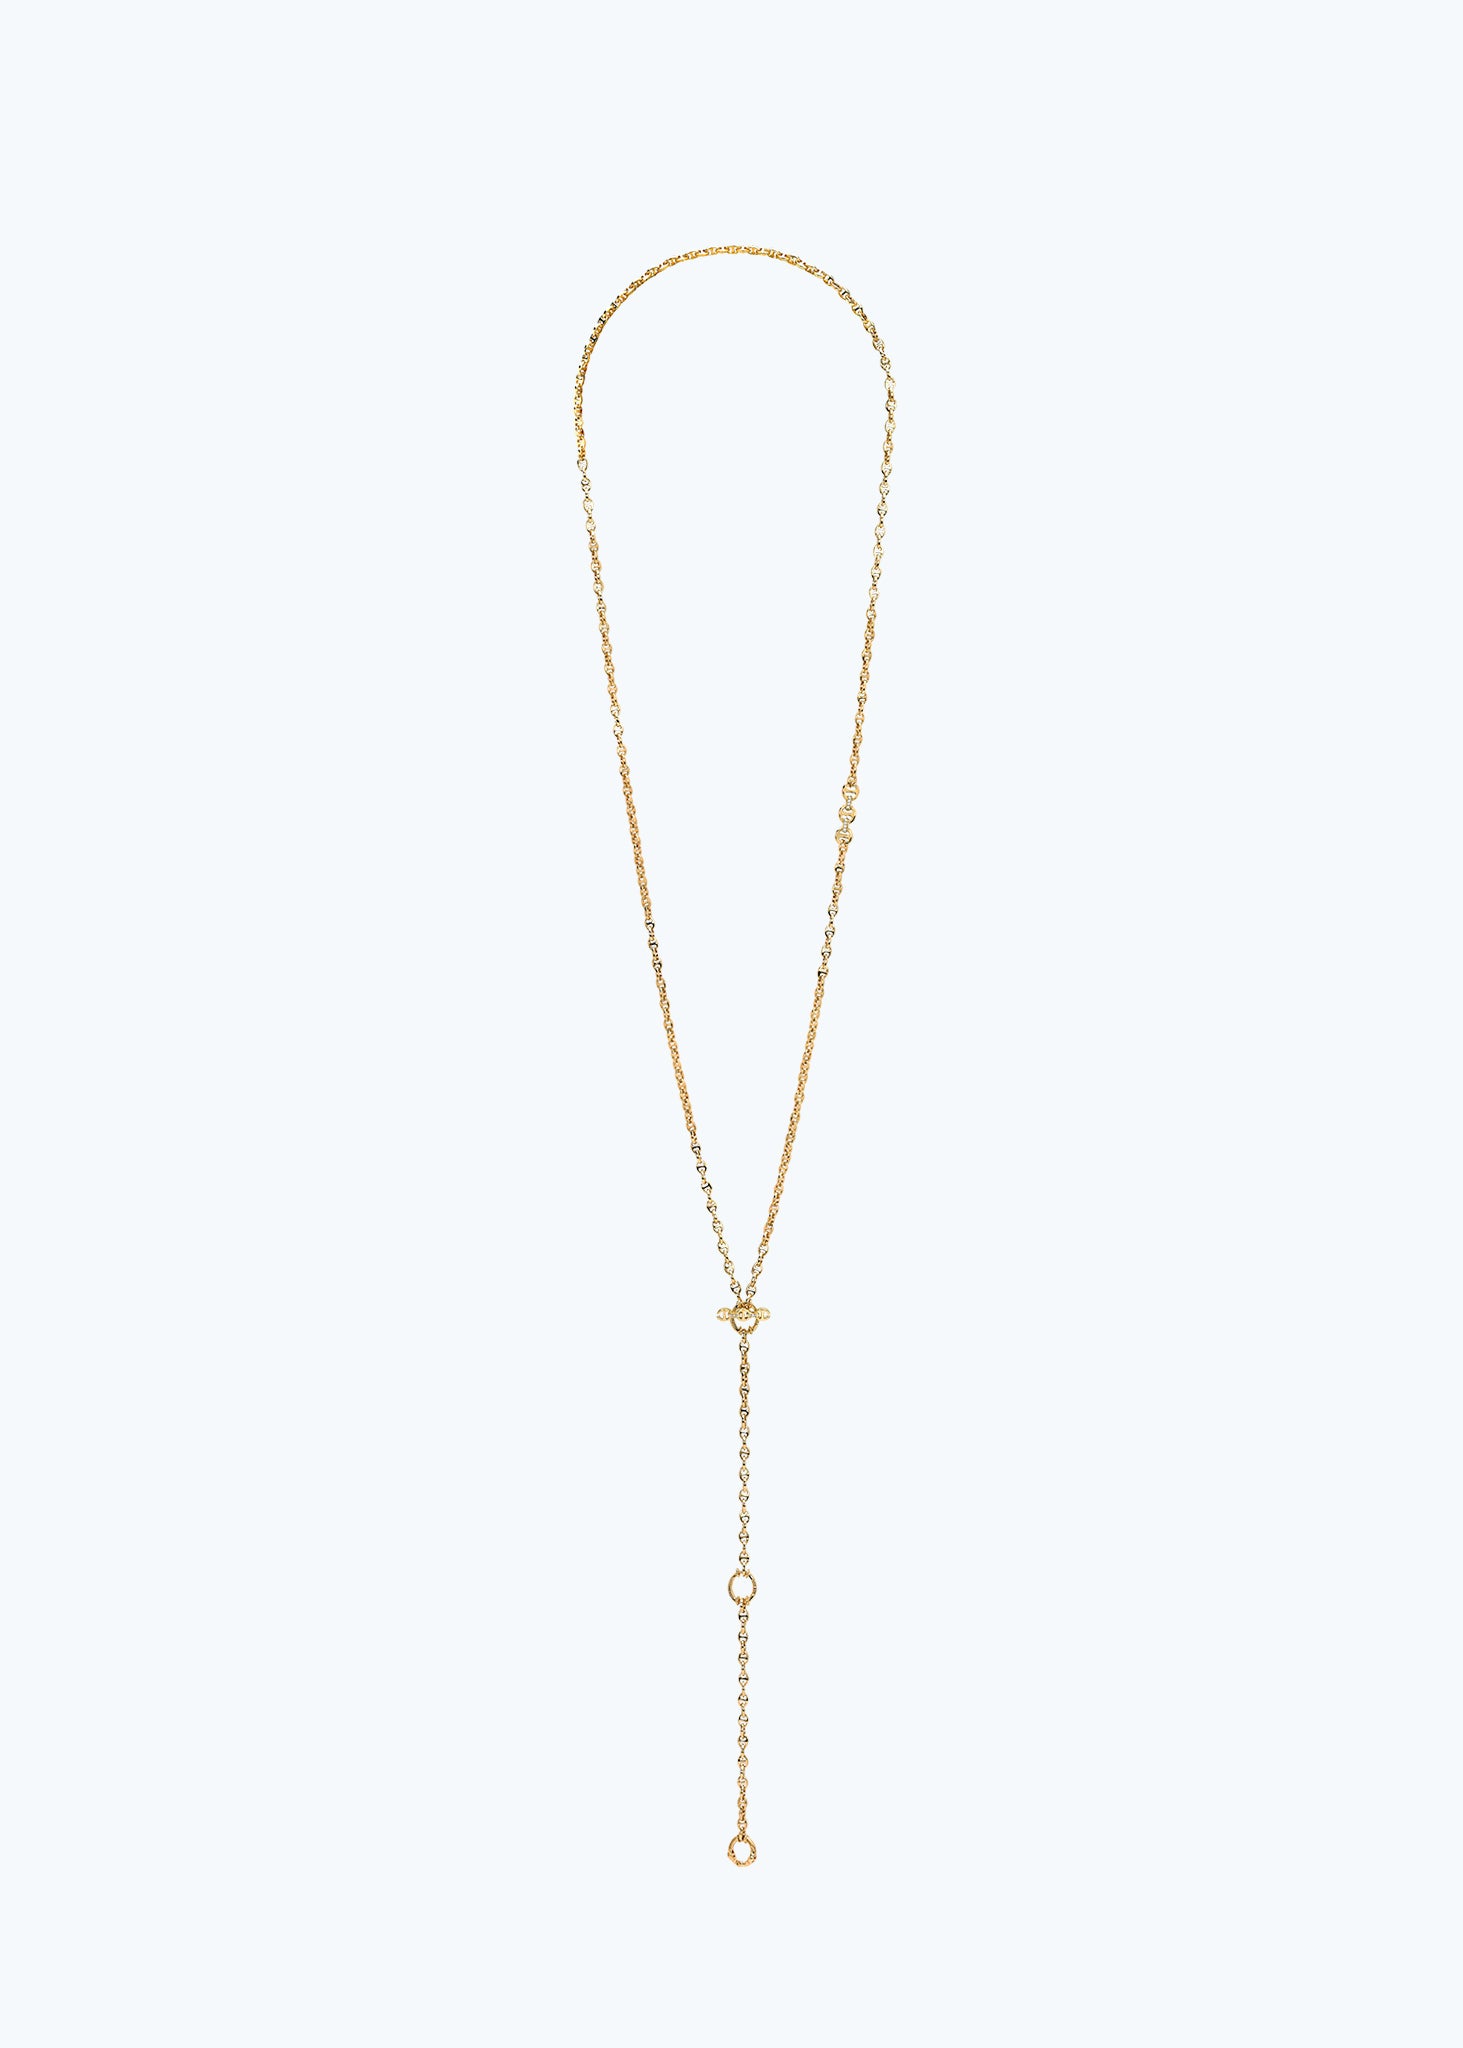 18k 3mm Open Link Necklace in Yellow Gold